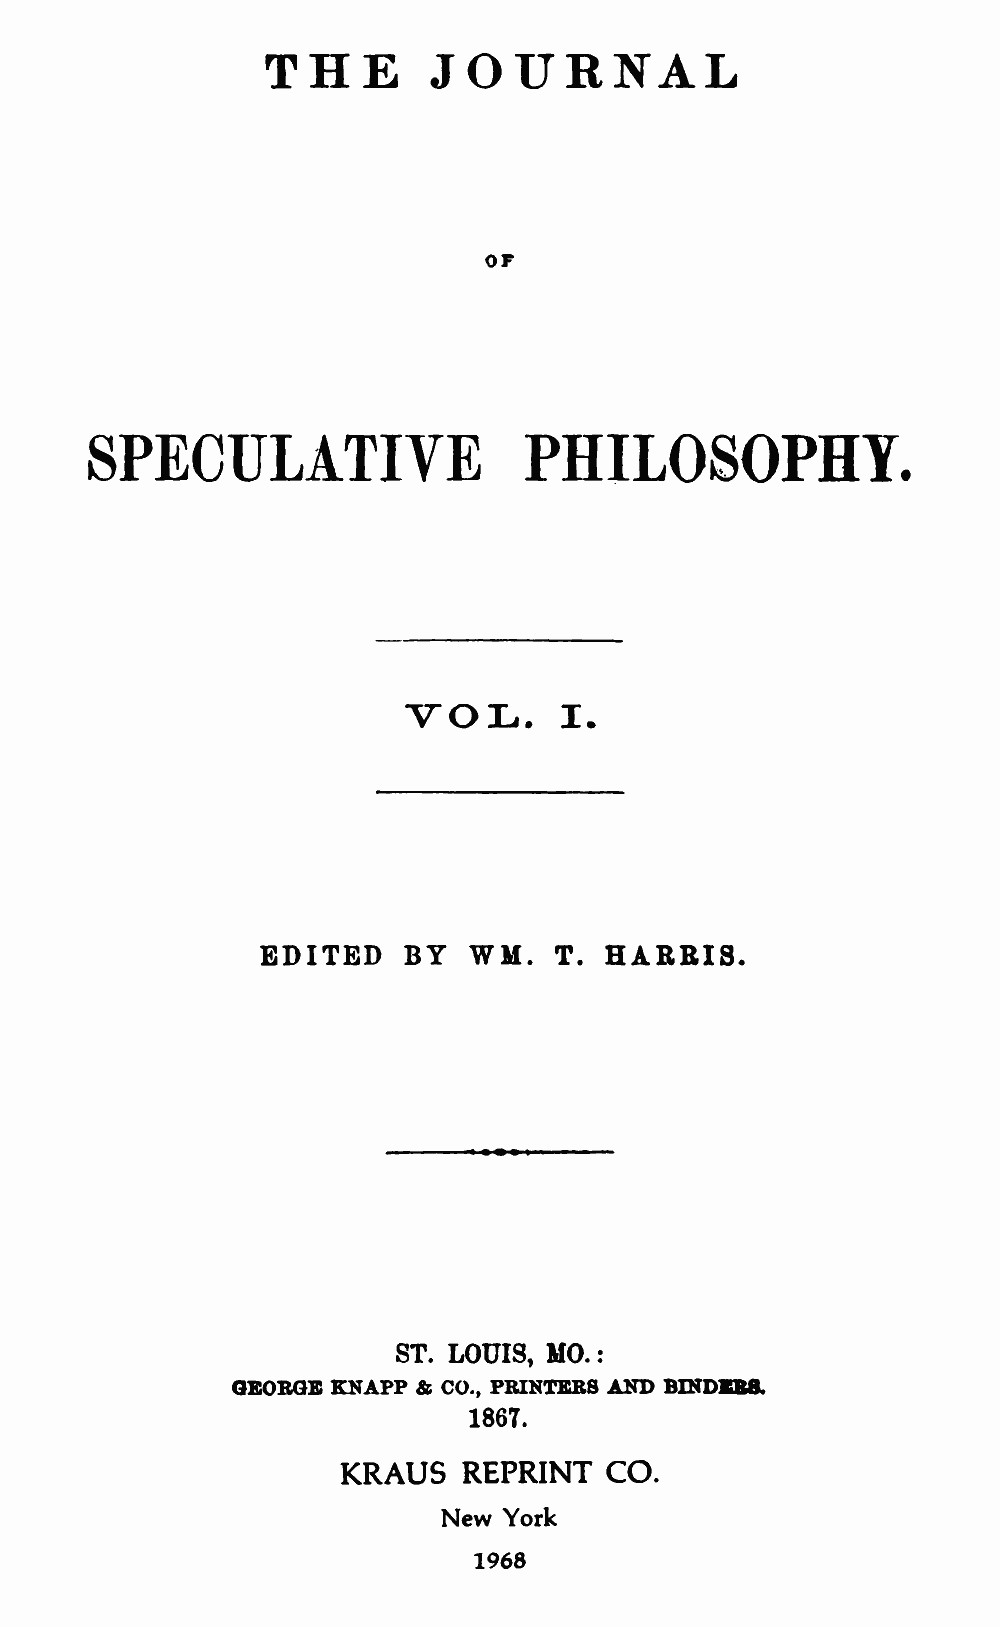 The Project Gutenberg eBook of The Journal of Speculative Philosophy,